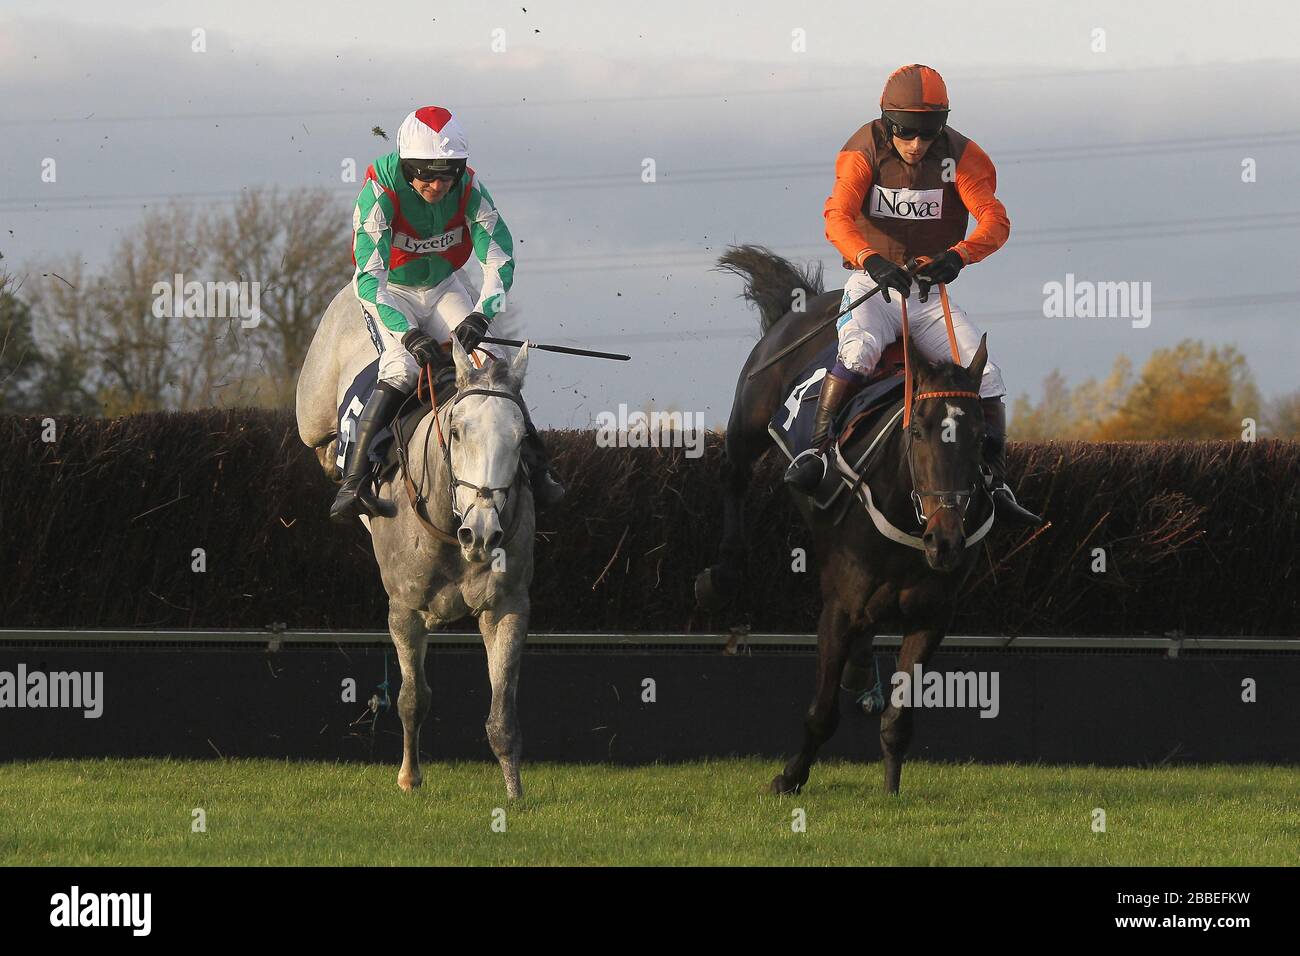 Rajdhani Express ridden by Mr S Waley-Cohen (R) and race wiiner Elenika ridden by Ruby Walsh in jumping action during the Tom Jones Memorial HTJ Centr Stock Photo